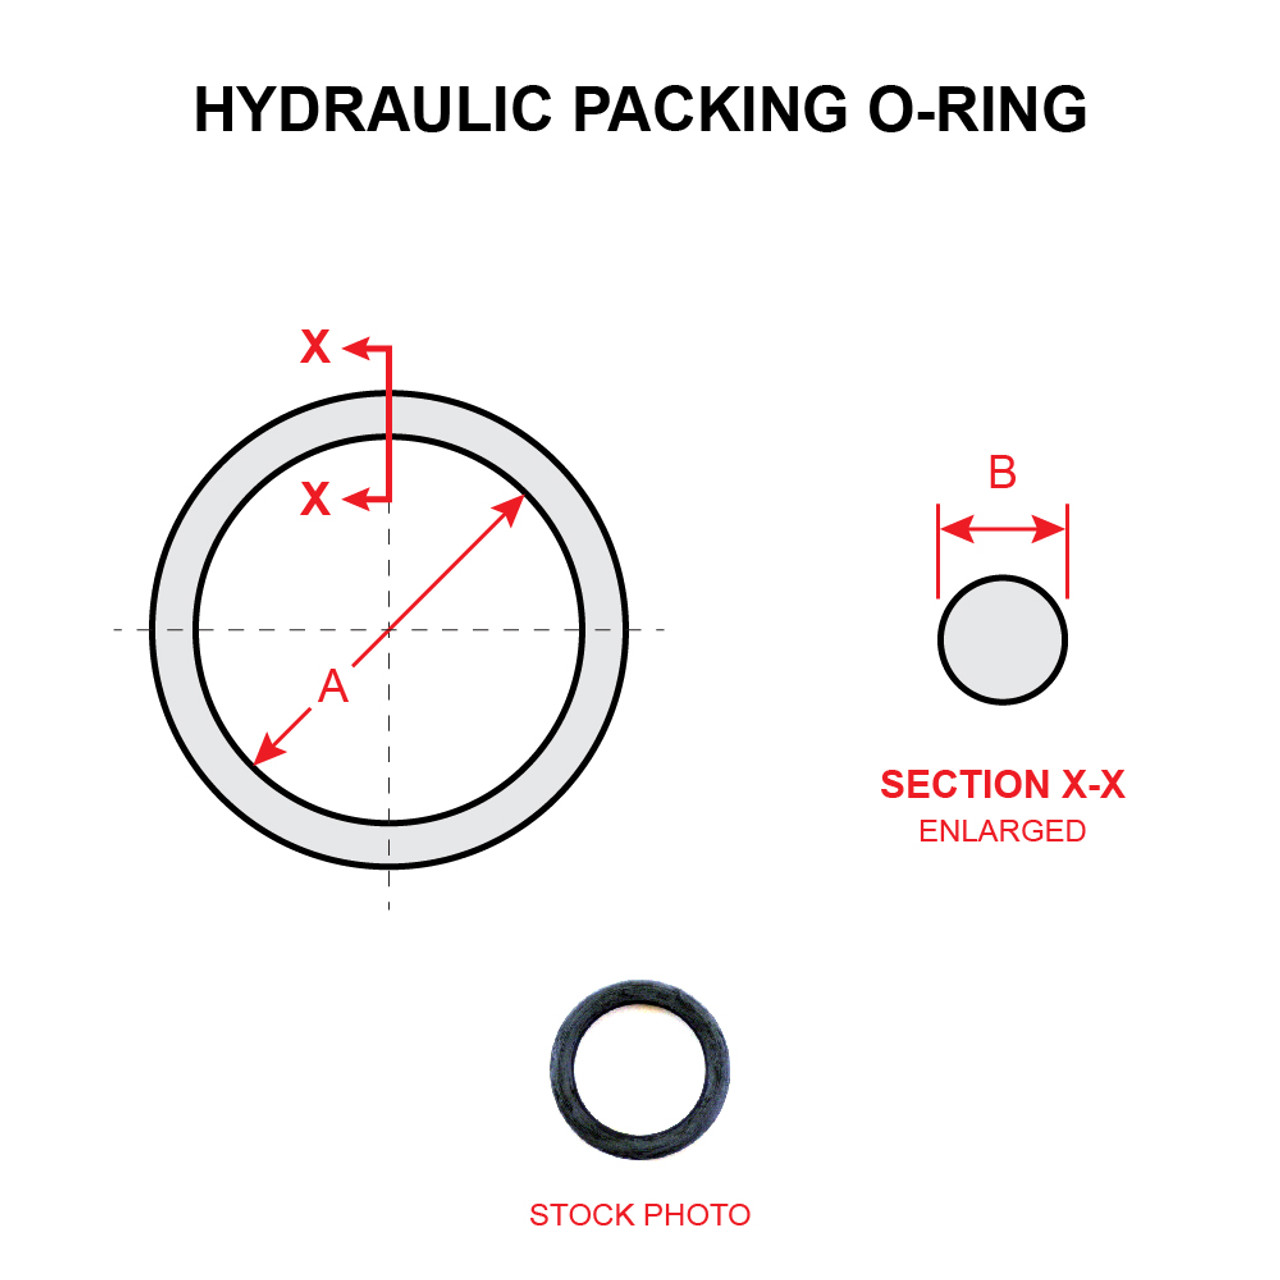 MS28775-009   HYDRAULIC PACKING O-RING